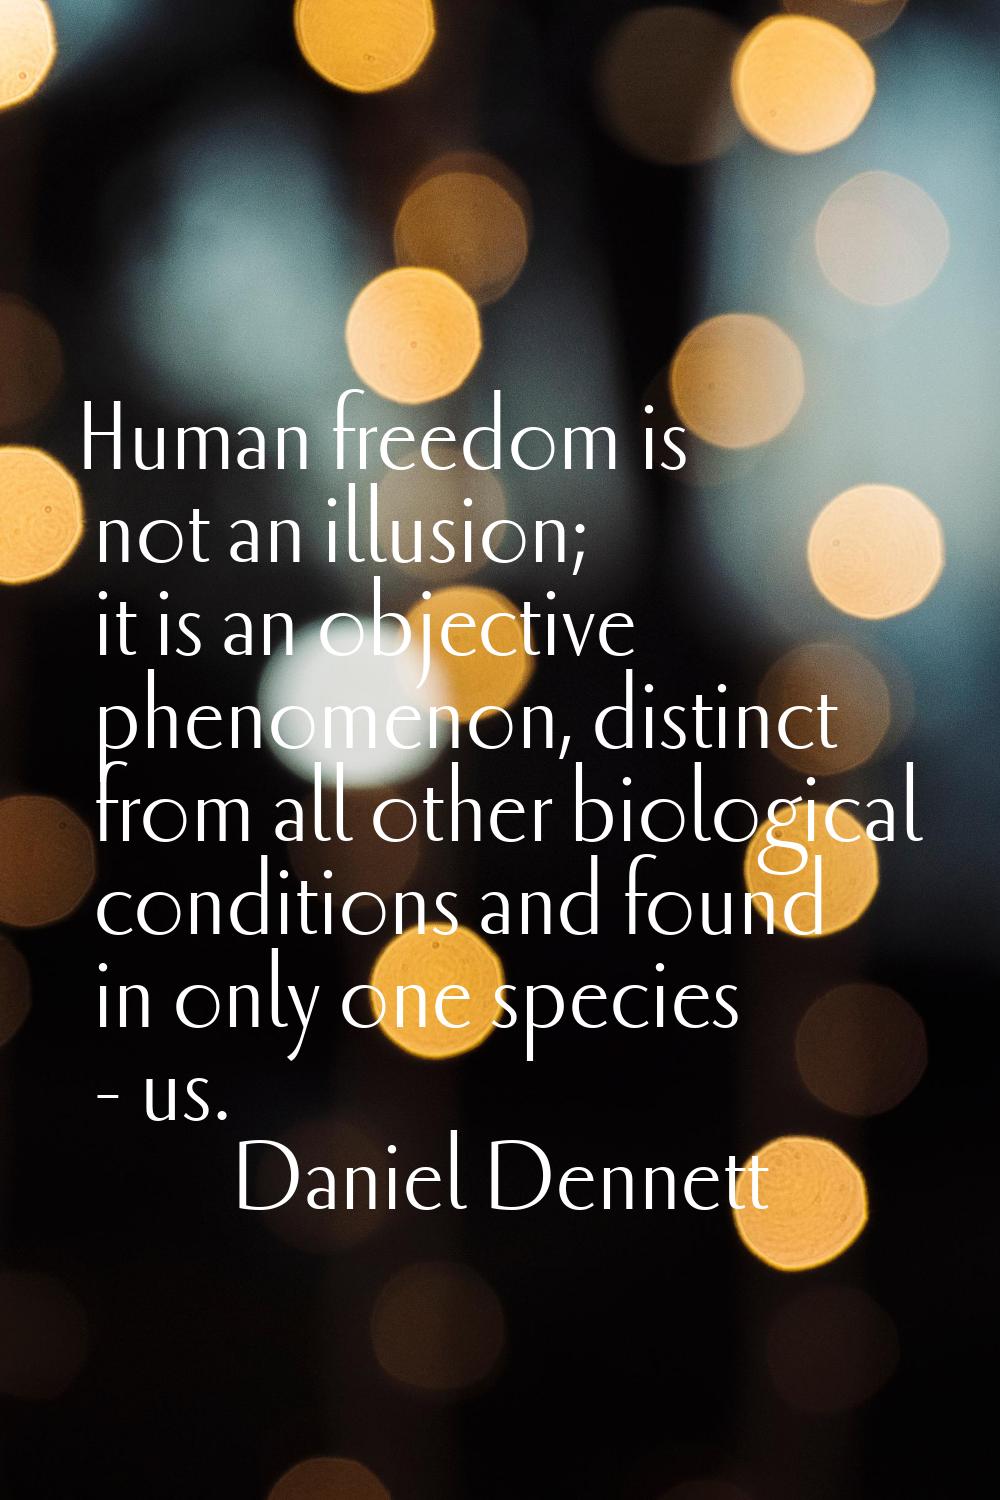 Human freedom is not an illusion; it is an objective phenomenon, distinct from all other biological